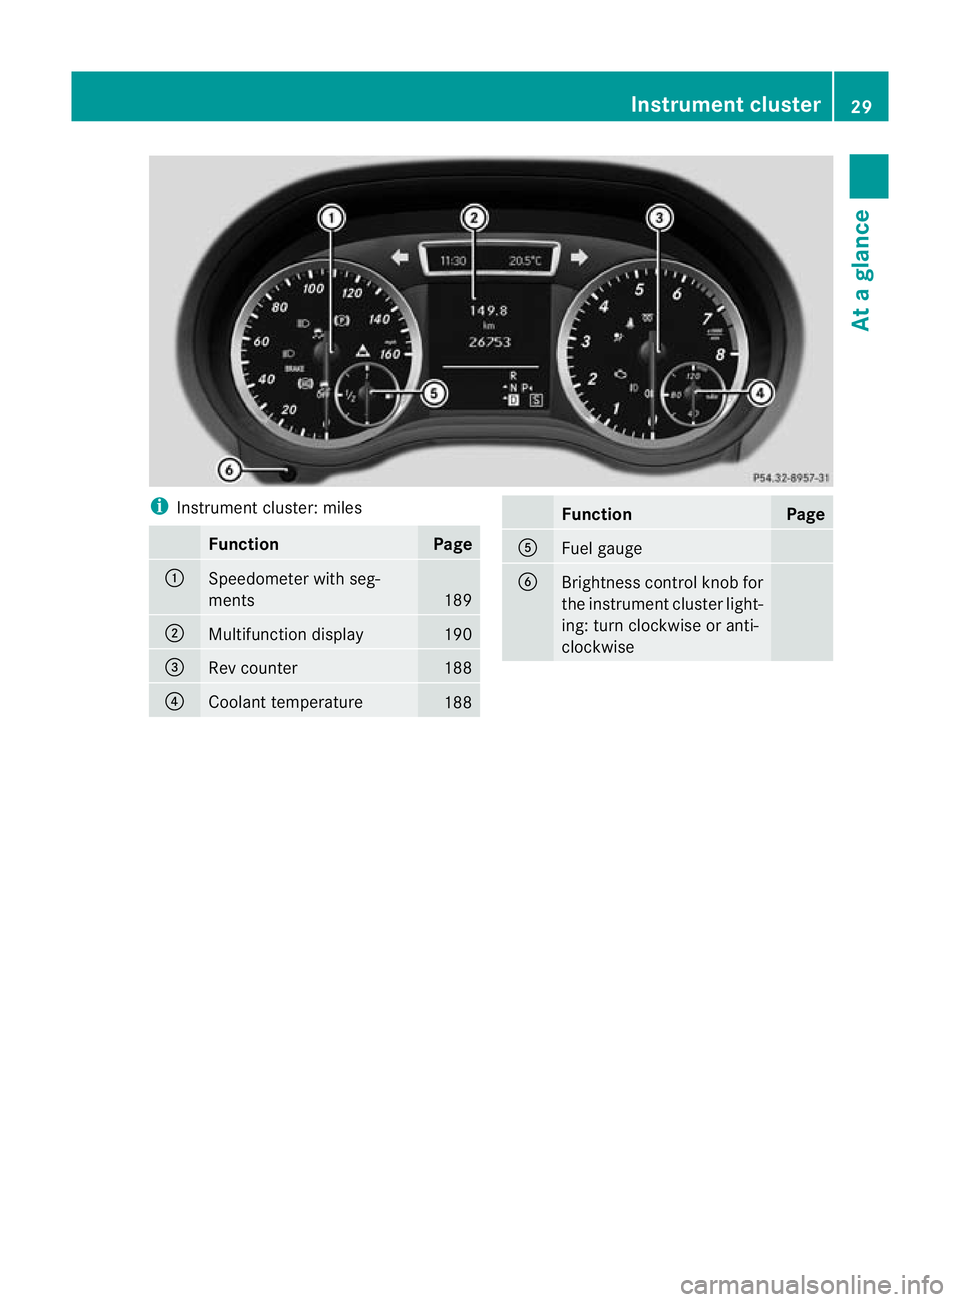 MERCEDES-BENZ B-CLASS HATCHBACK 2011  Owners Manual i
Instrument cluster: miles Function Page
:
Speedometer with seg-
ments
189
;
Multifunction display 190
=
Rev counter 188
?
Coolant temperature
188 Function Page
A
Fuel gauge
B
Brightness control knob